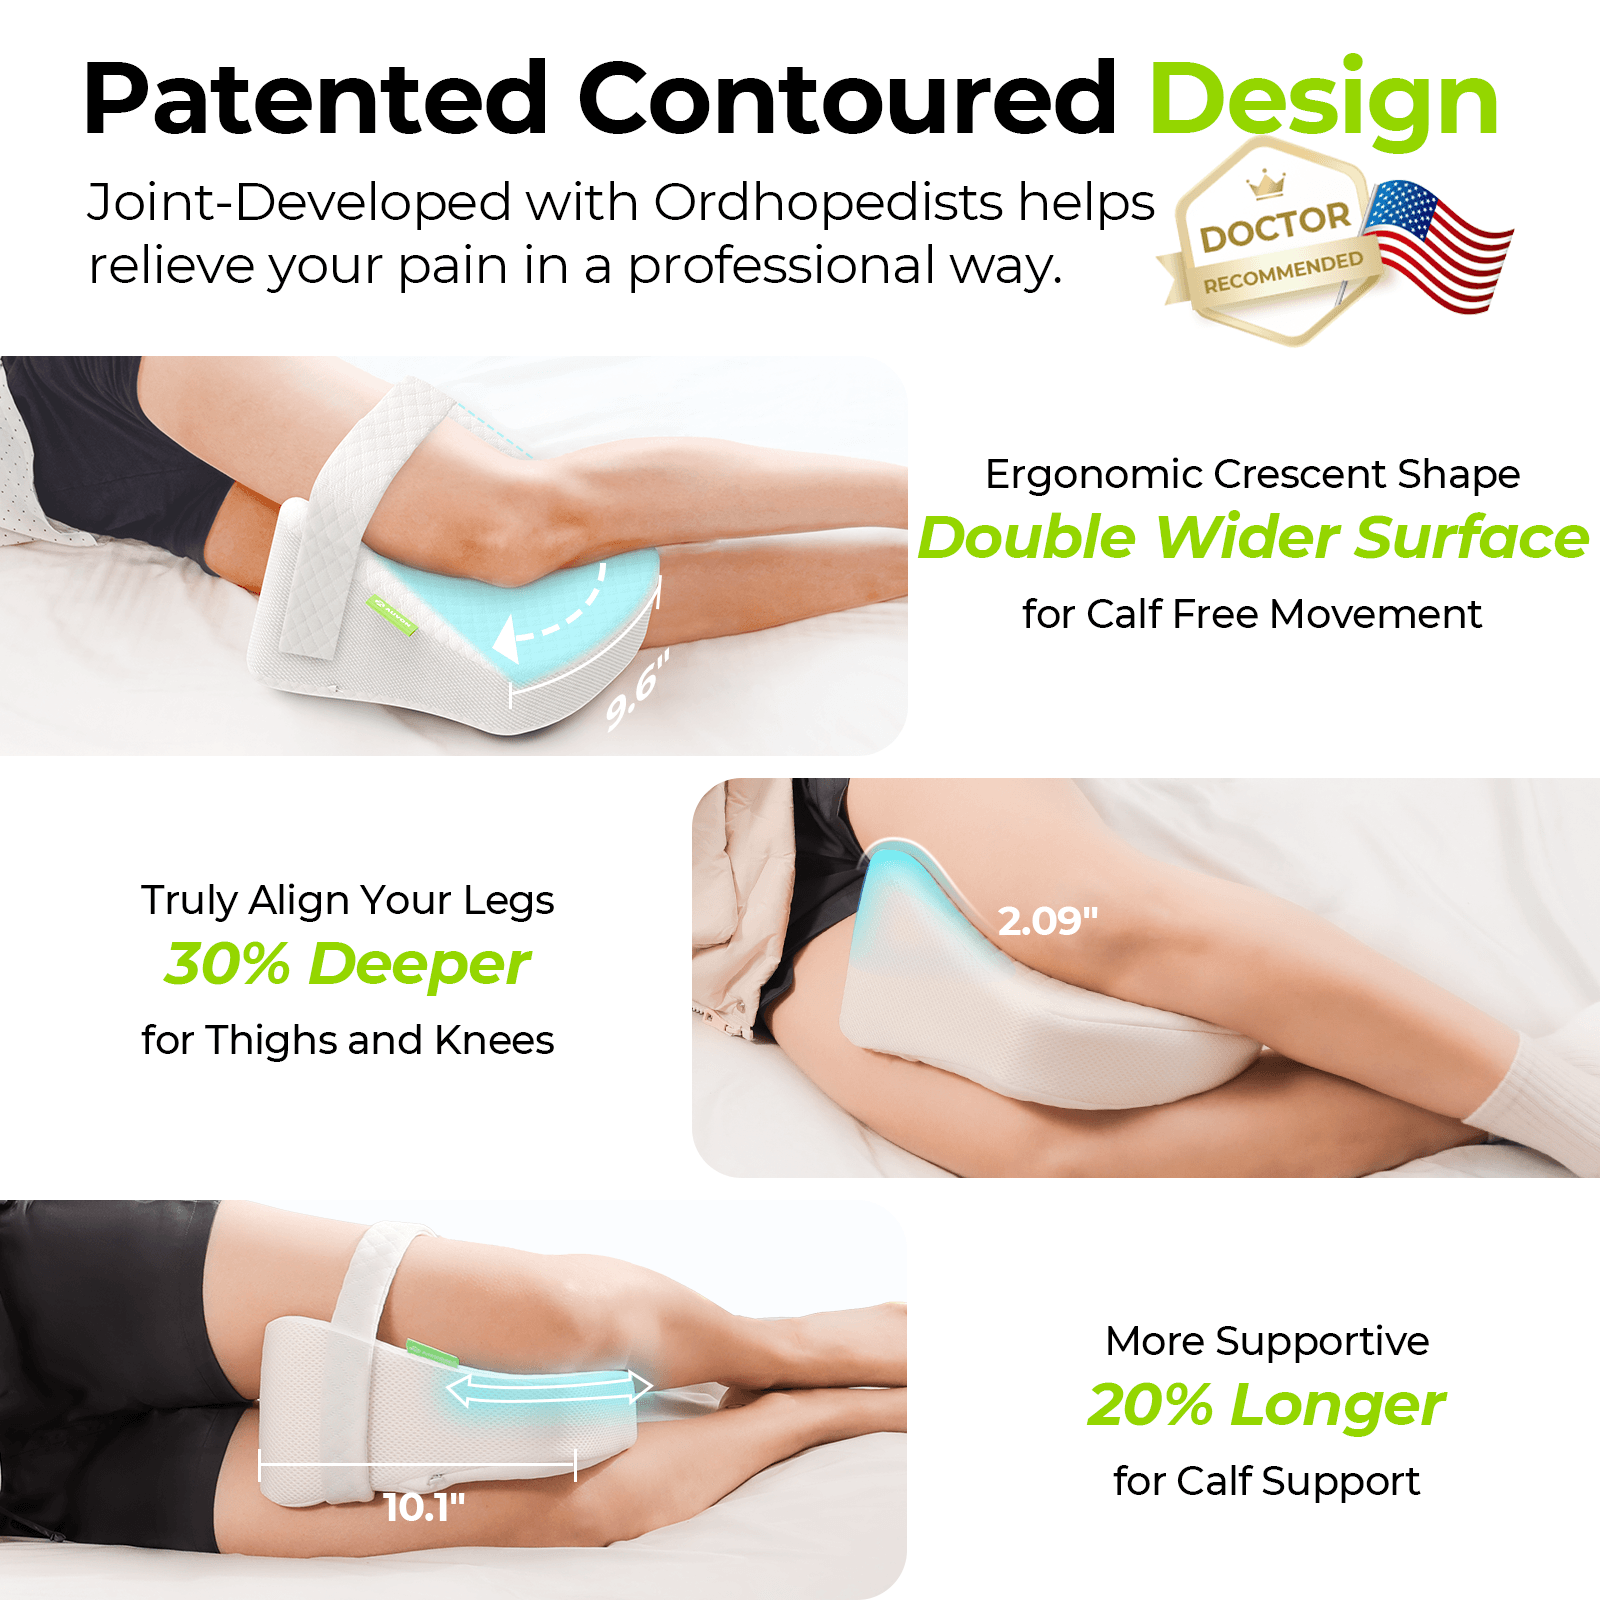 Knee Pillow - Between The Legs Pillow for Side Sleepers